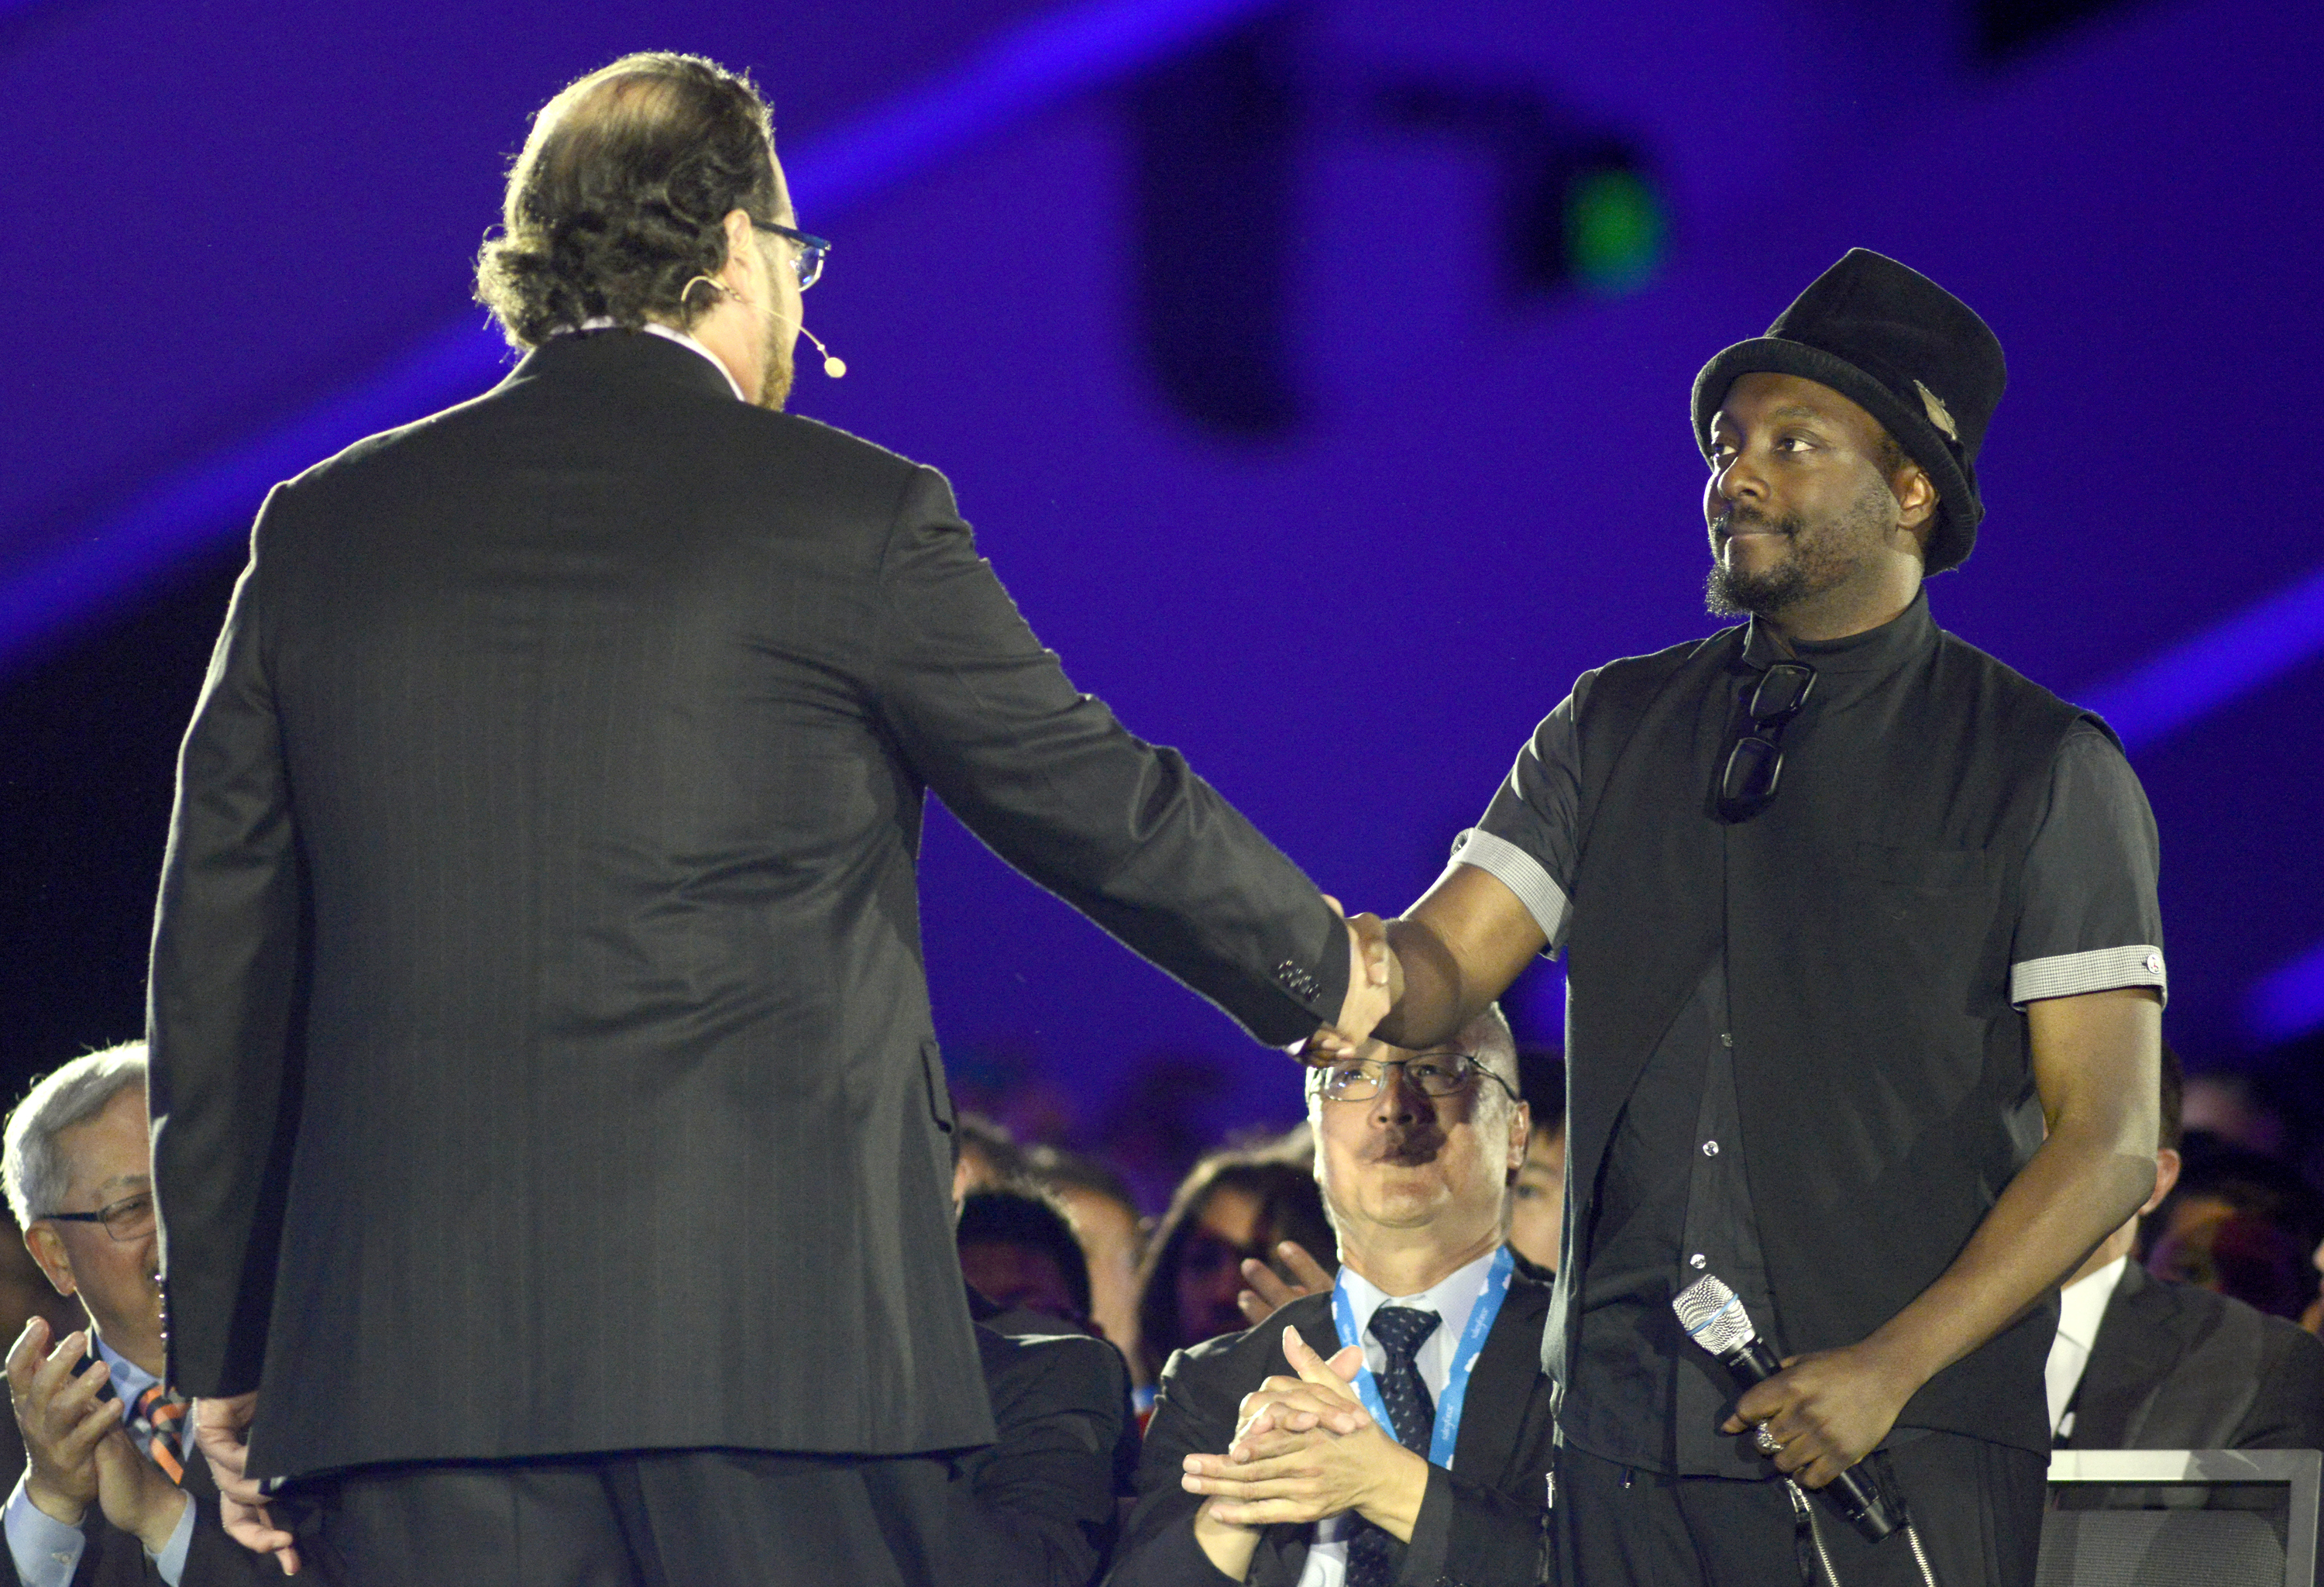 Marc Benioff (left) and will.i.am participate in the keynote speech at Salesforce.com's Dreamforce 2014 Conference. (Tim Mosenfelder&mdash;Getty Images)